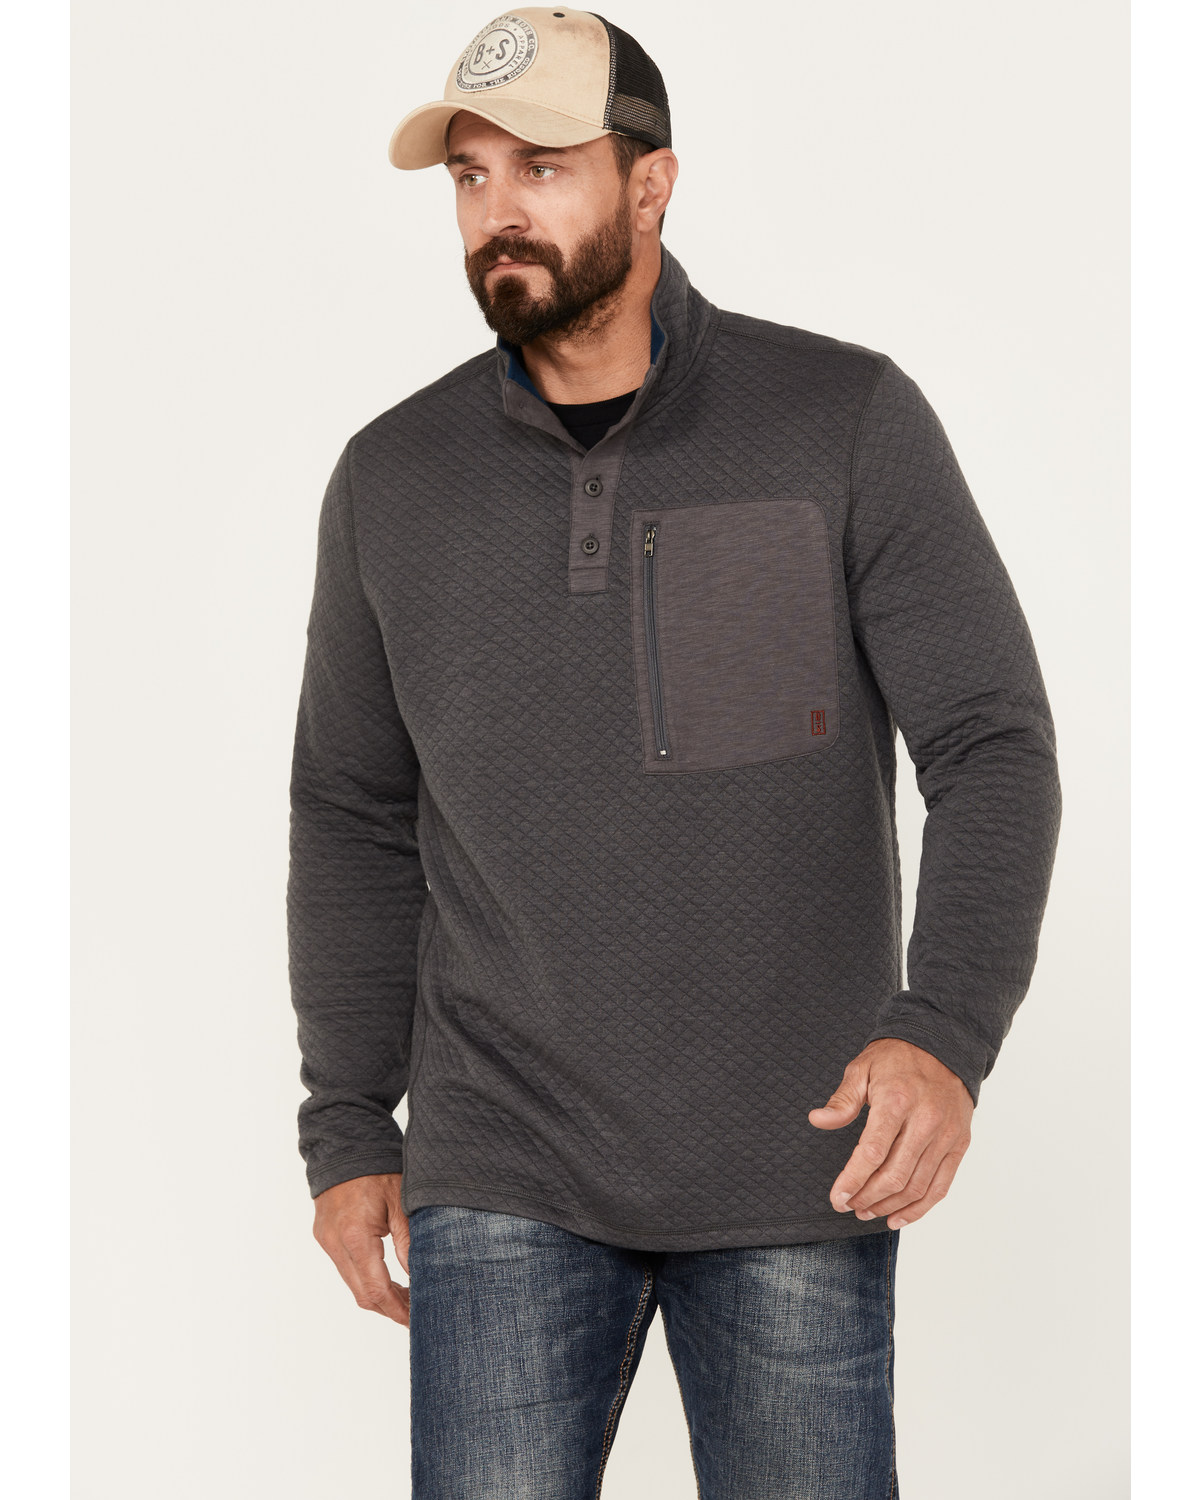 Brothers and Sons Men's Button Mock Pullover